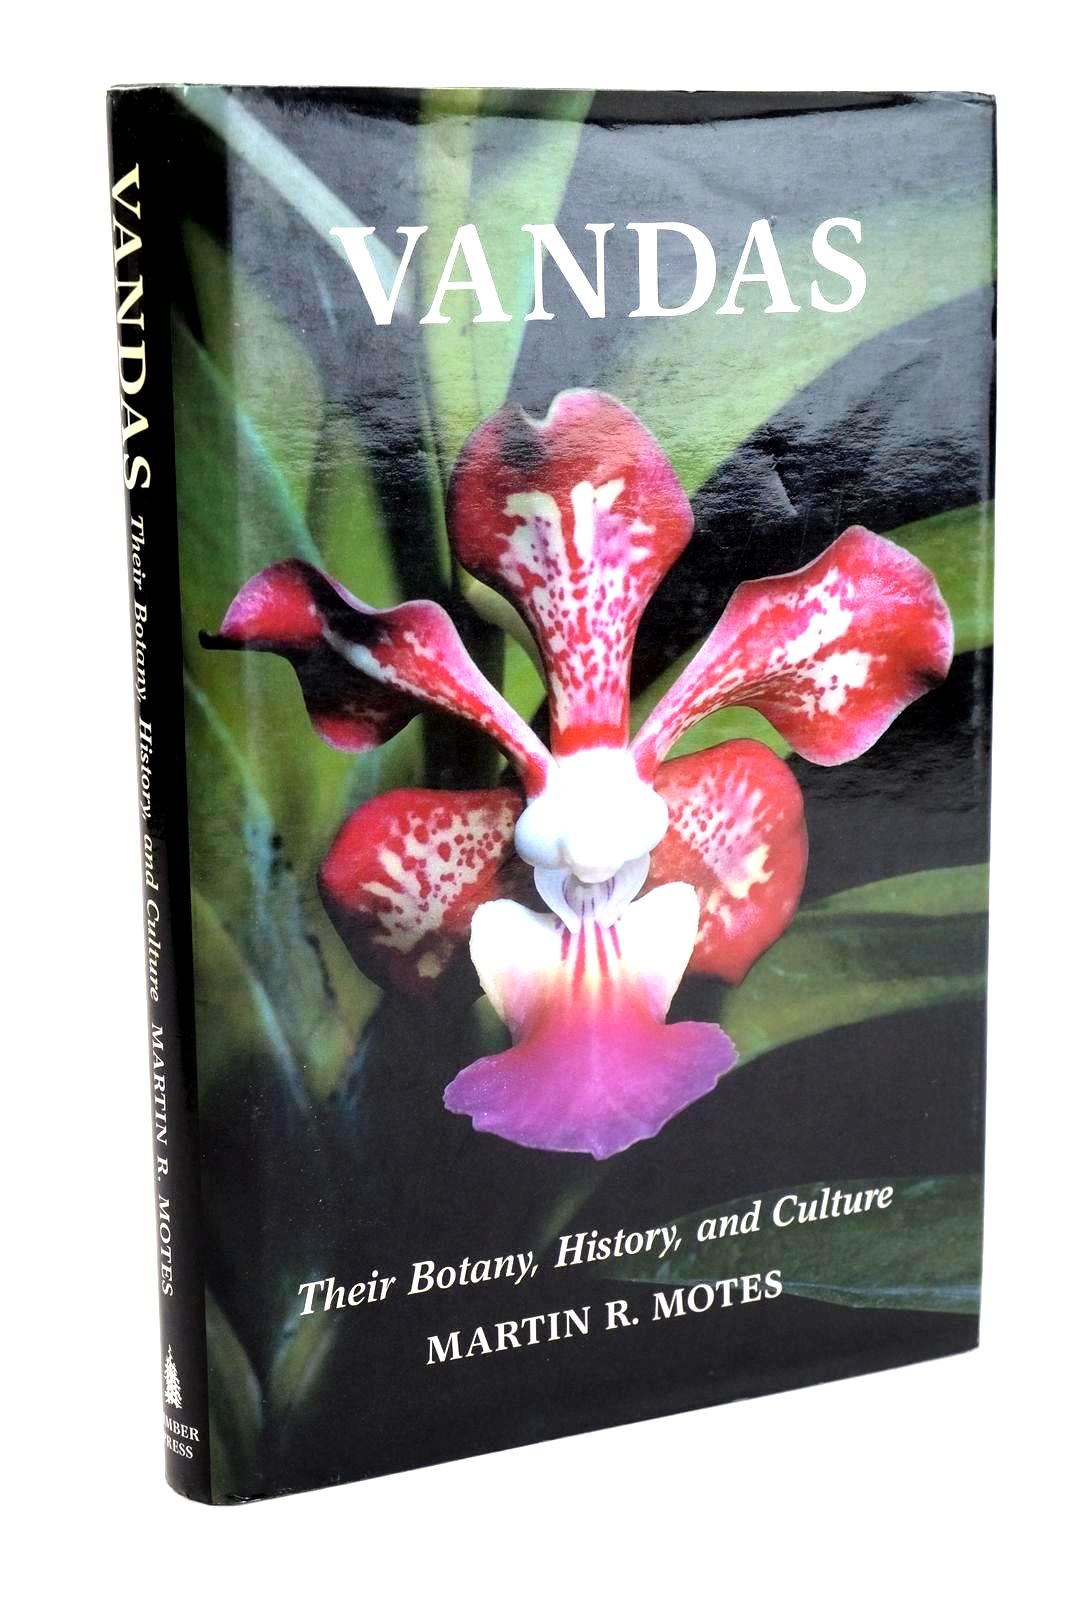 Photo of VANDAS THEIR BOTANY, HISTORY, AND CULTURE- Stock Number: 1324272